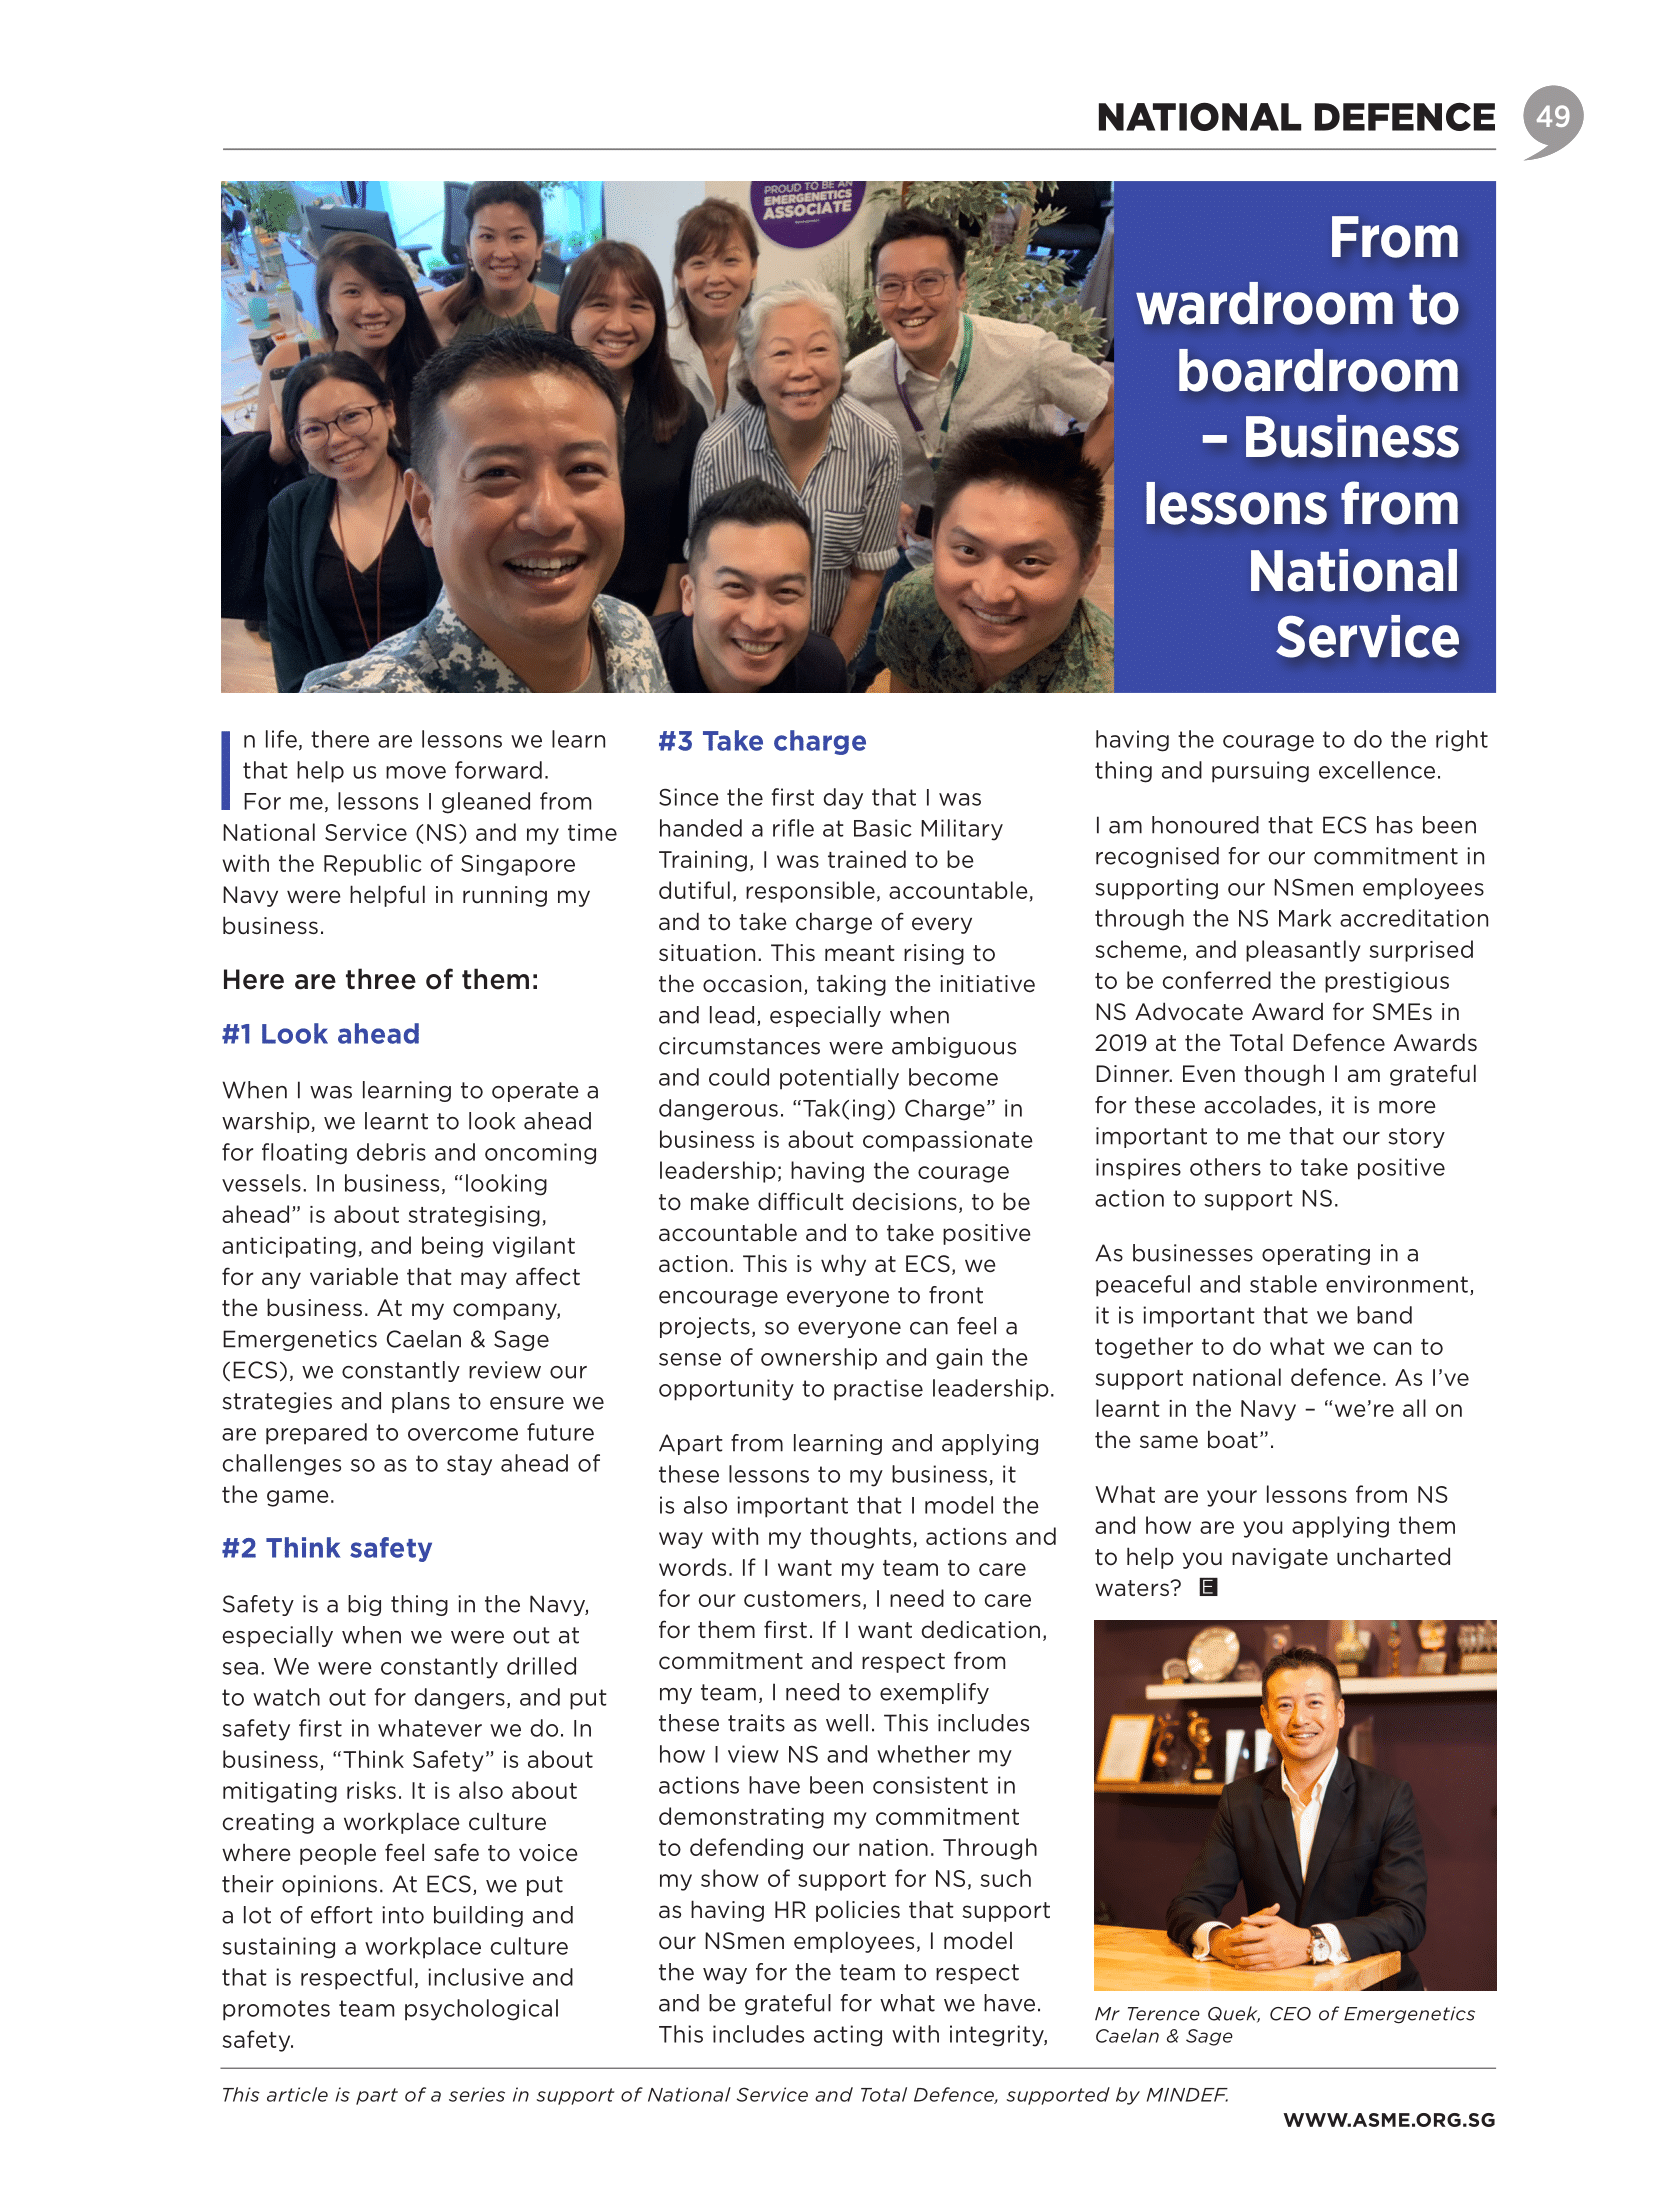 Entrepreneurs’ Digest: From wardroom to boardroom – Business lessons from National Service – Nov/Dec 19 Issue